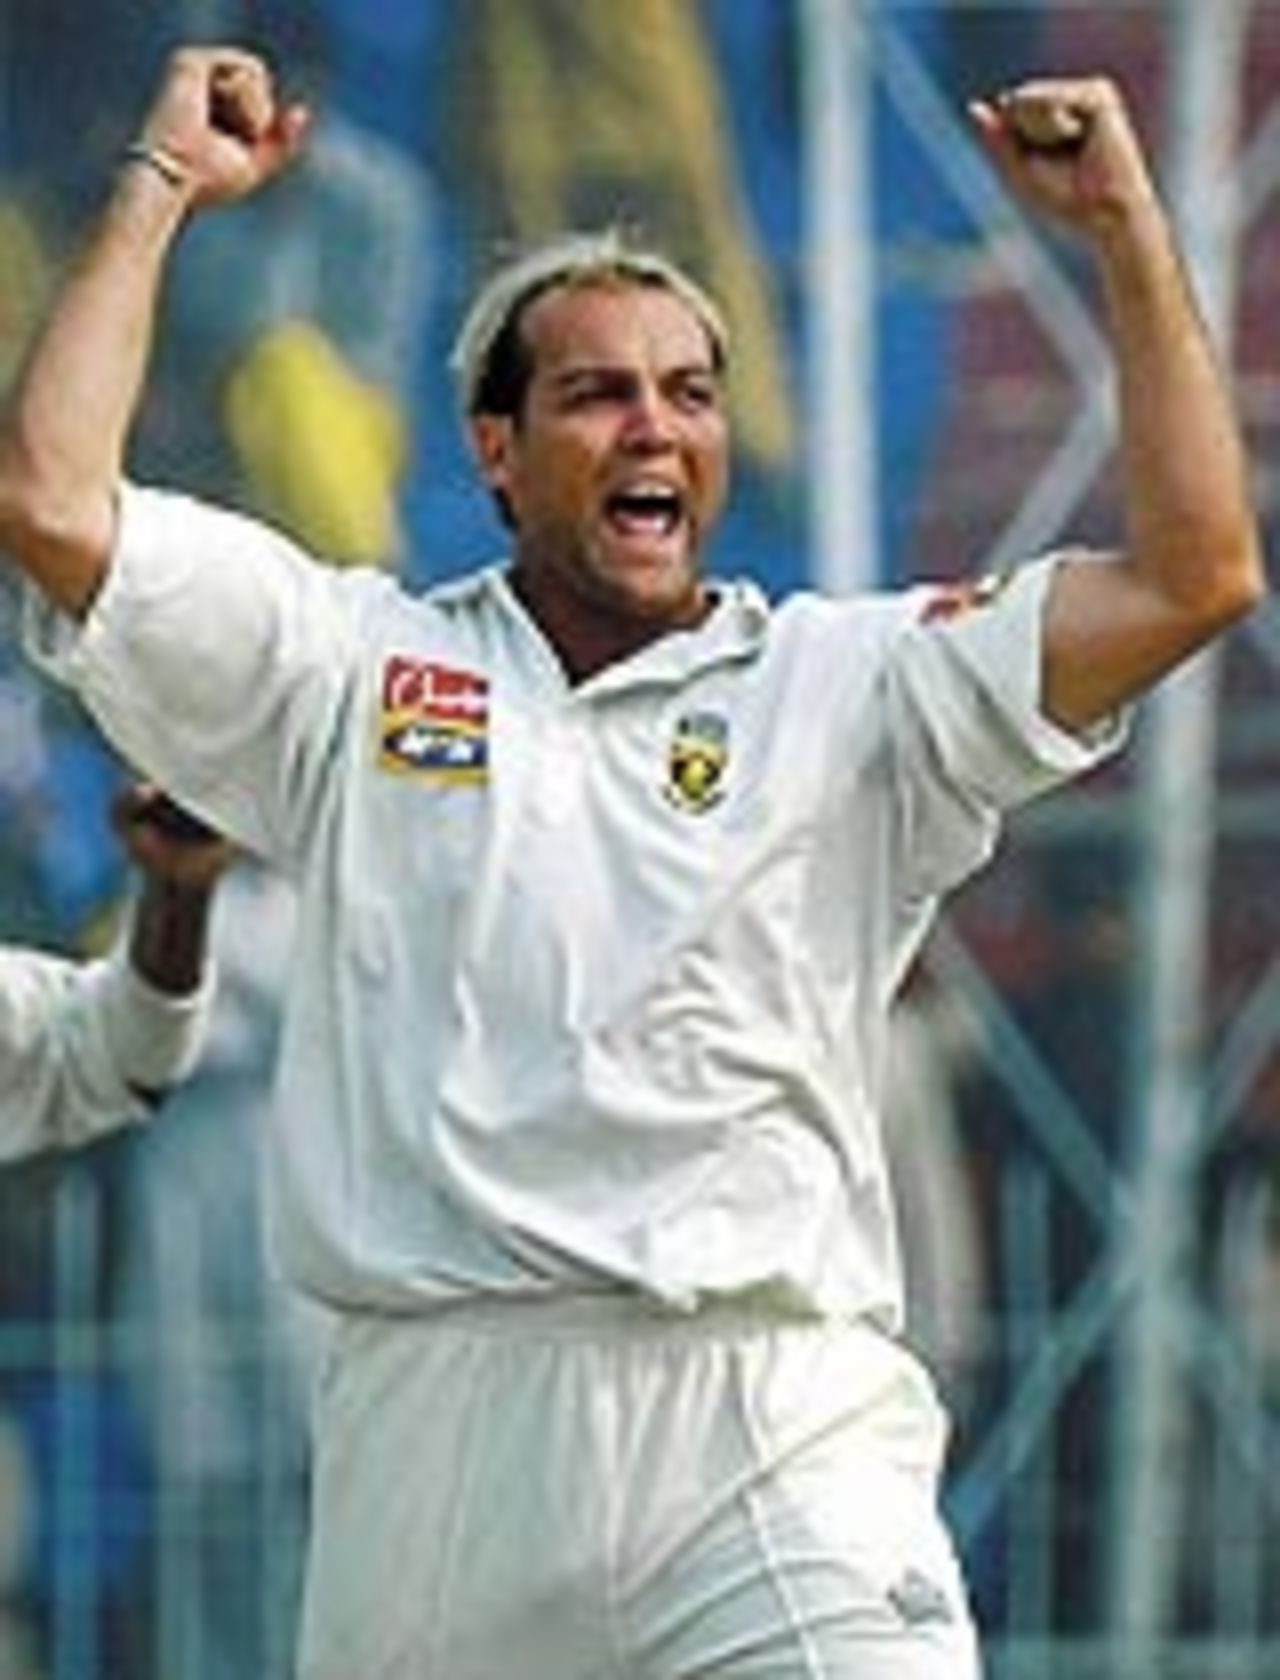 Jacques Kallis celebrates after dismissing Imran Farhat on the final day, Pakistan v South Africa, 2nd Test, Faisalabad, 5th day